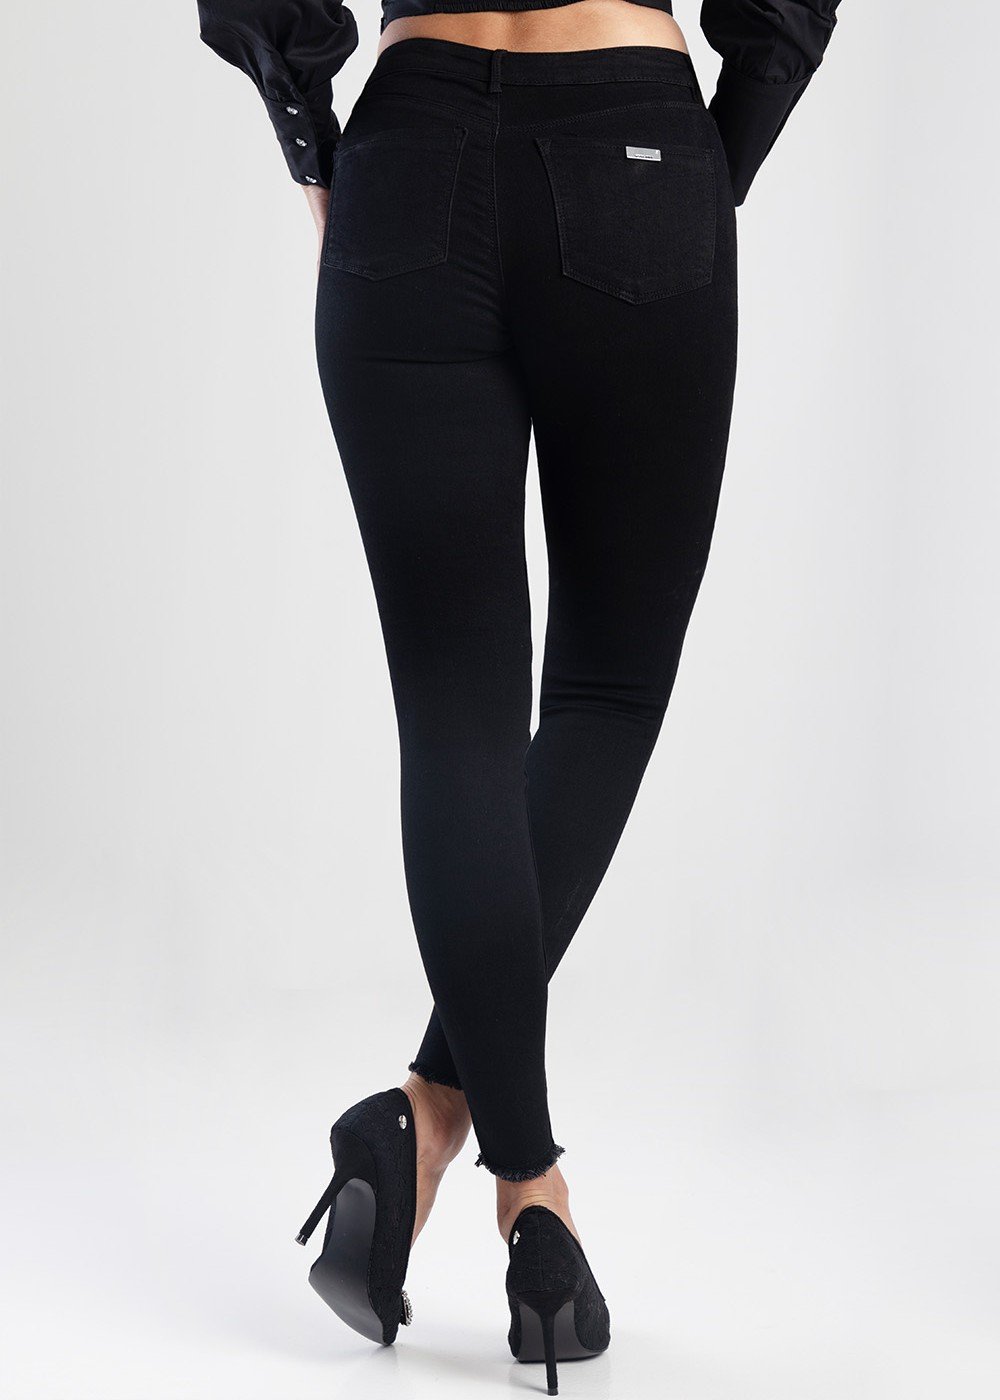 Axel Skinny Jean With Heart Trim - Black